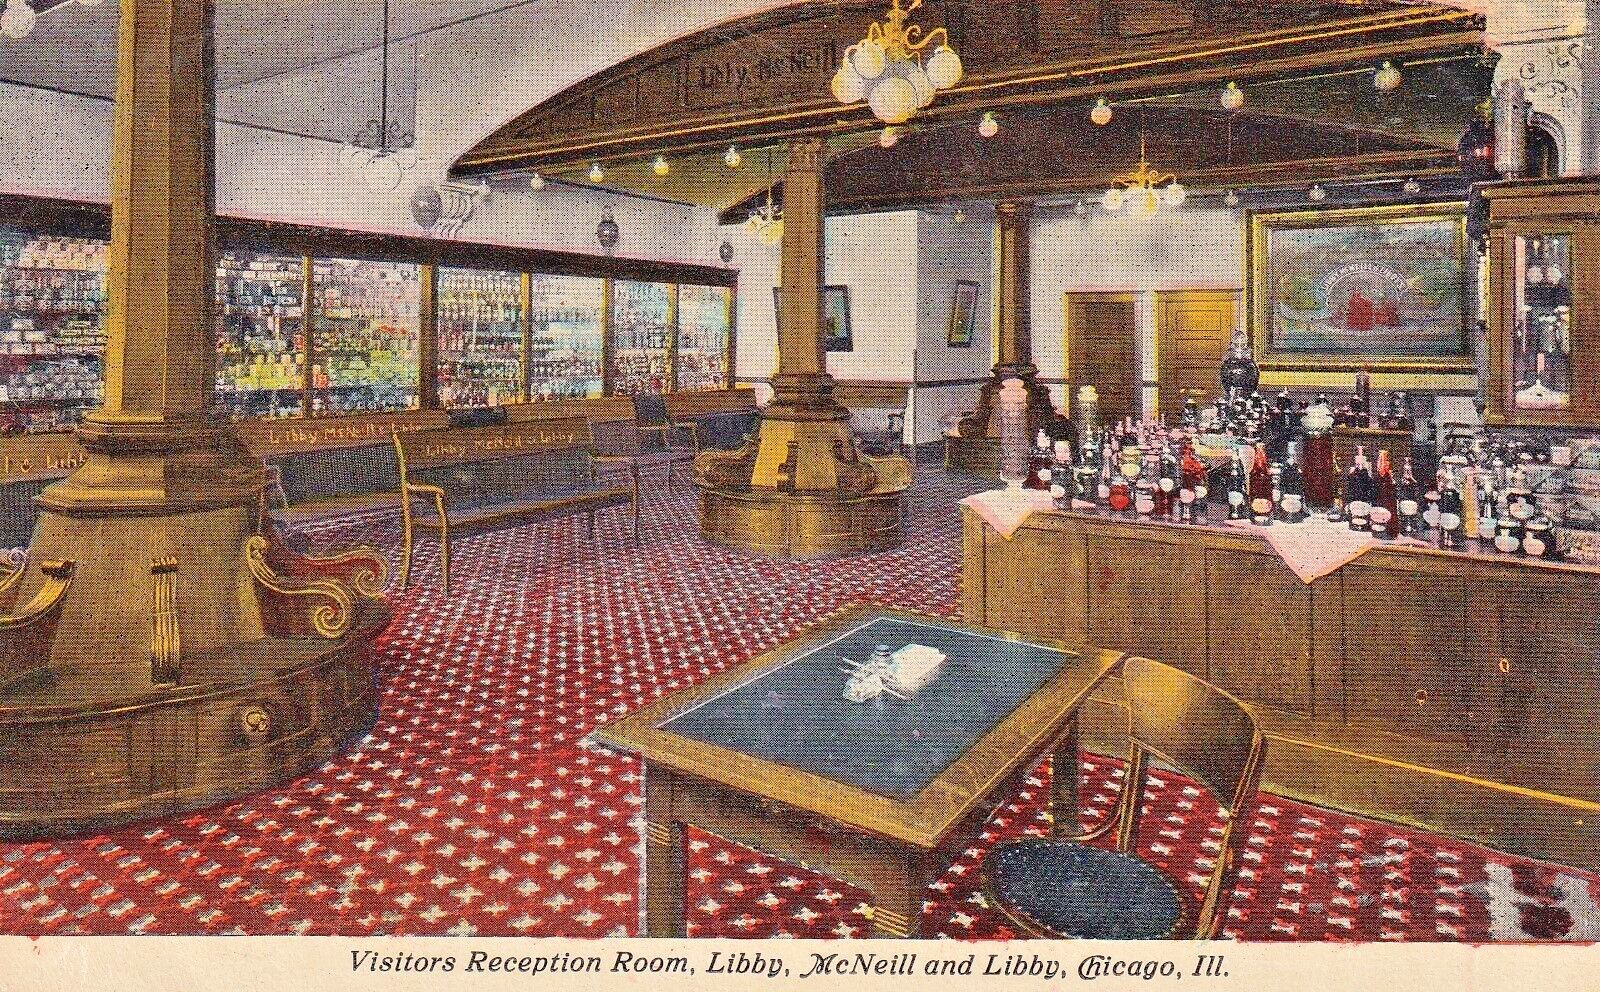 Postcard IL Chicago Illinois Libby McNeill Libby Visitors Reception Room I11